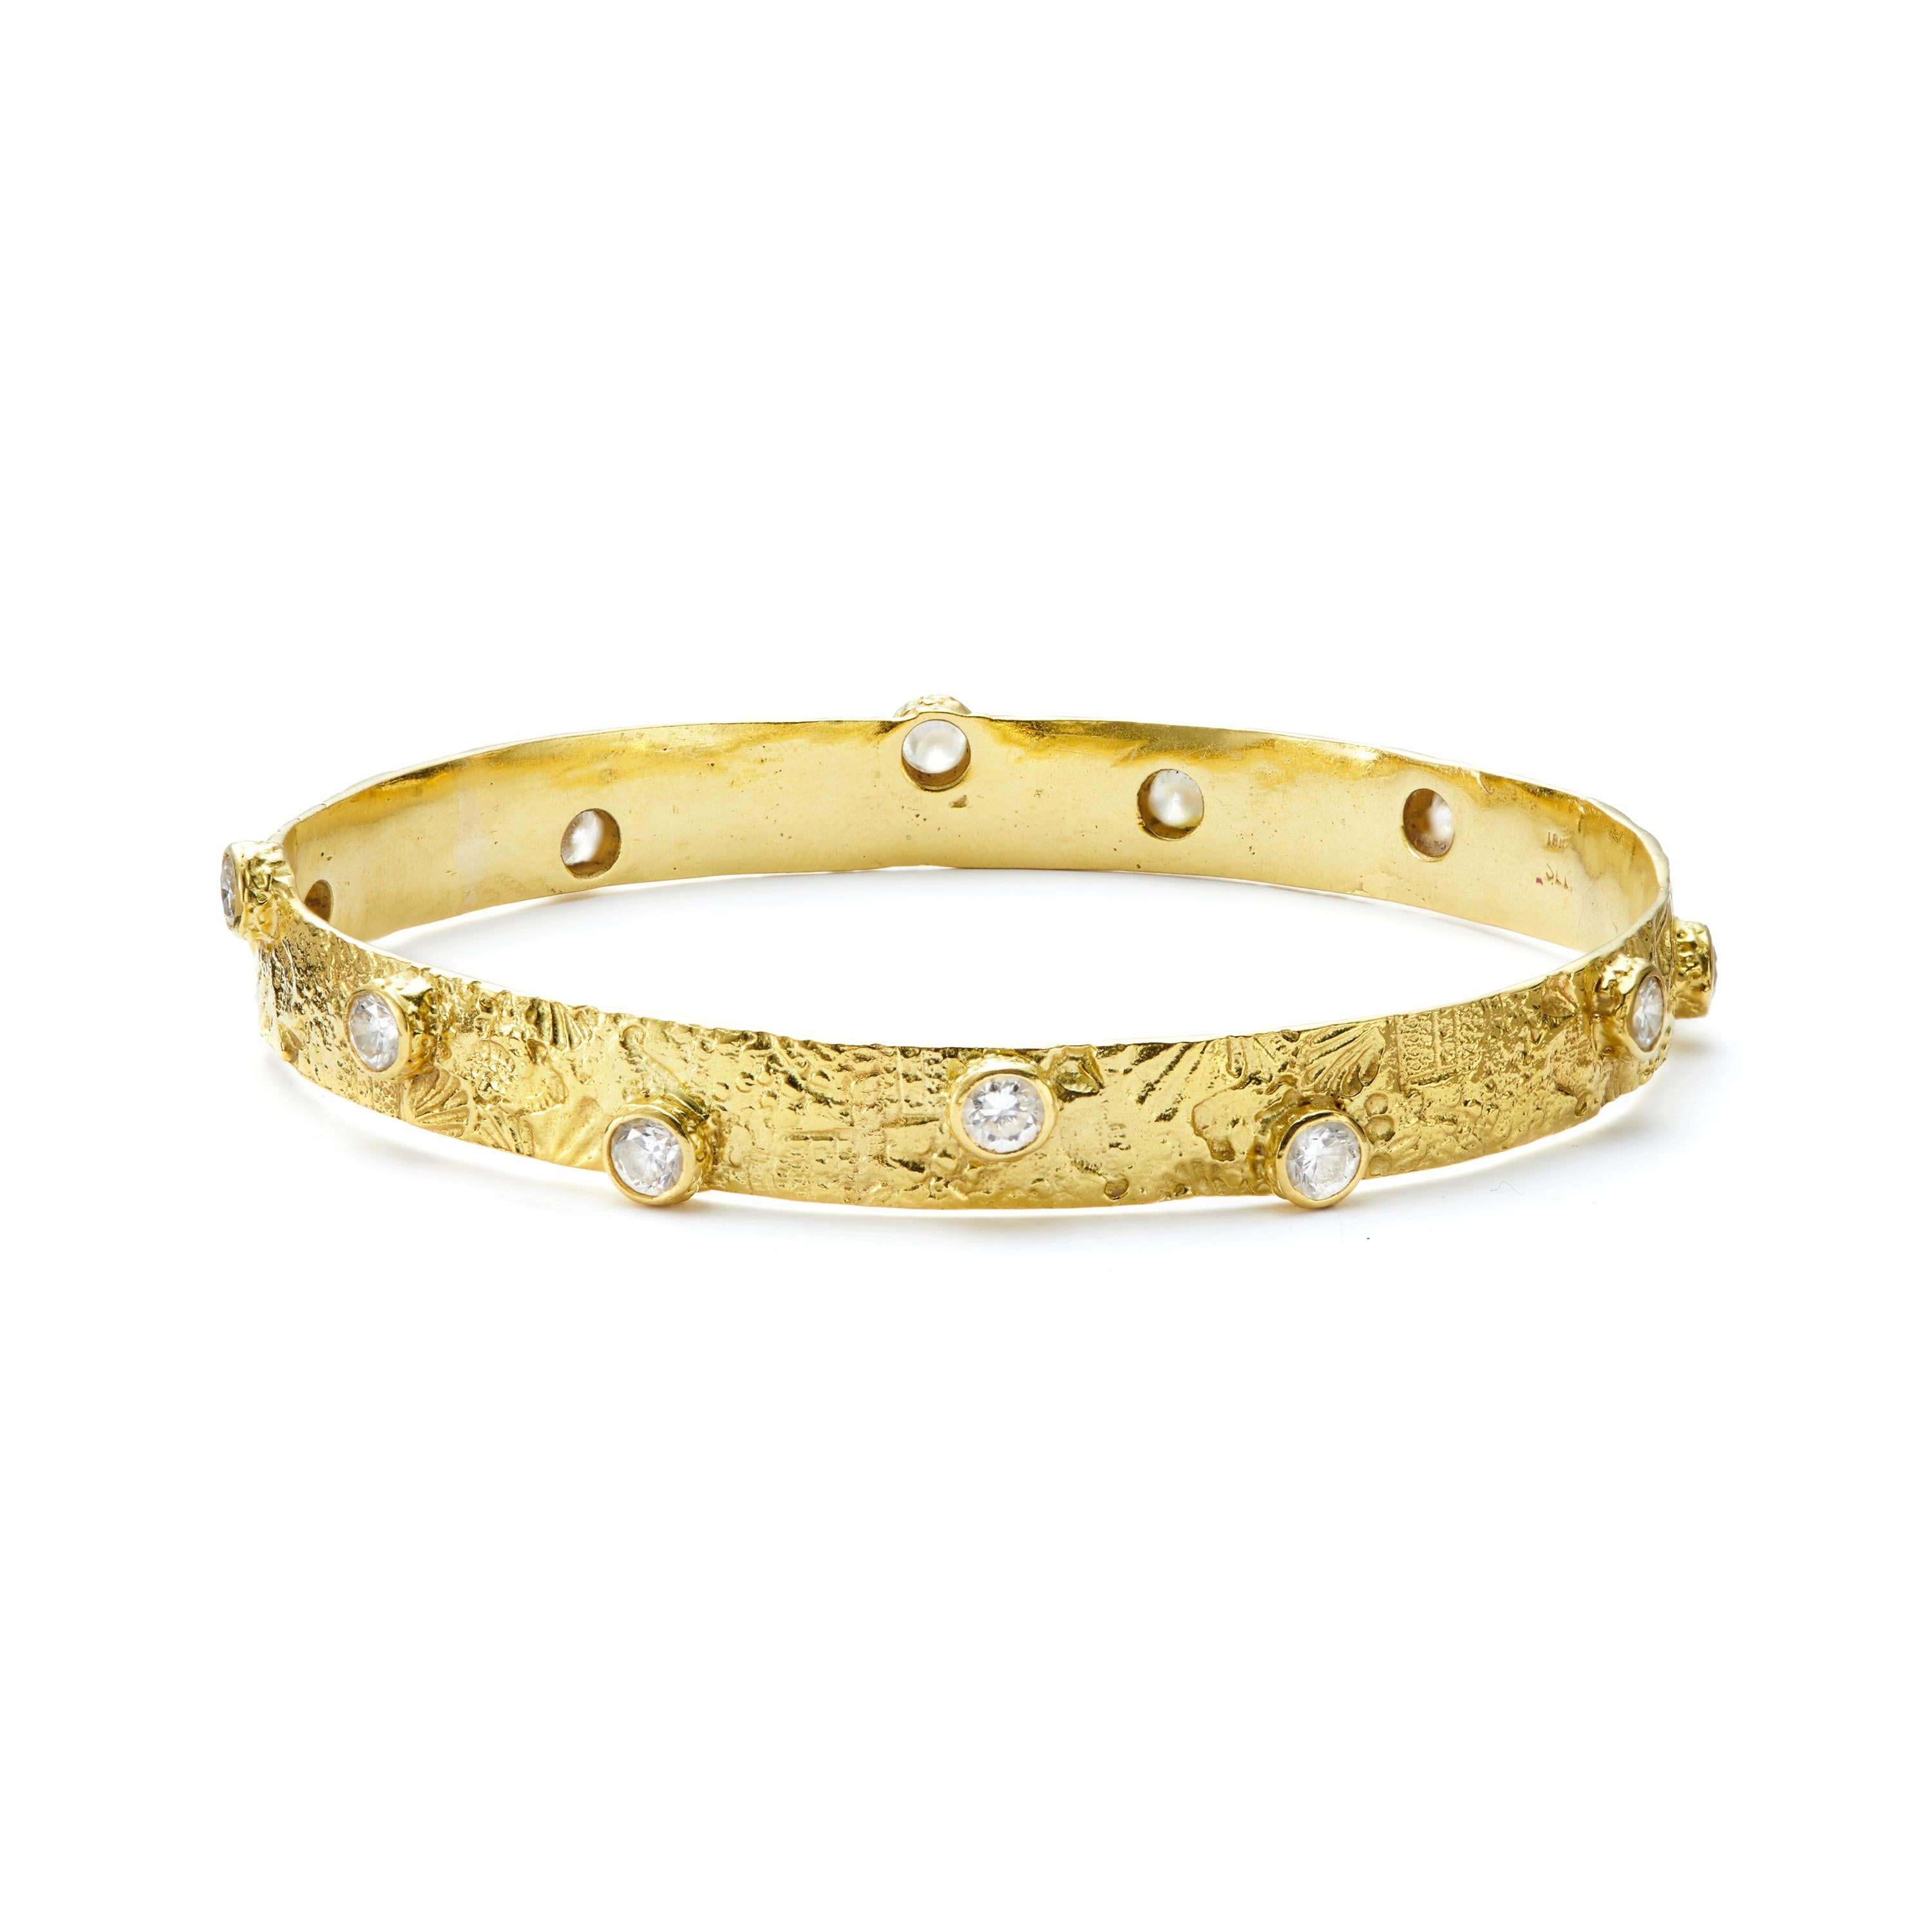 Our 18kt Gold Seascape Bangle, scattered with over 3 carats of brilliant cut Diamonds, is the perfect piece for any occasion.

Diamonds: 3.33ct GSI1

Also available with Blue Sapphires, Pink Sapphires, or Aquamarines.


